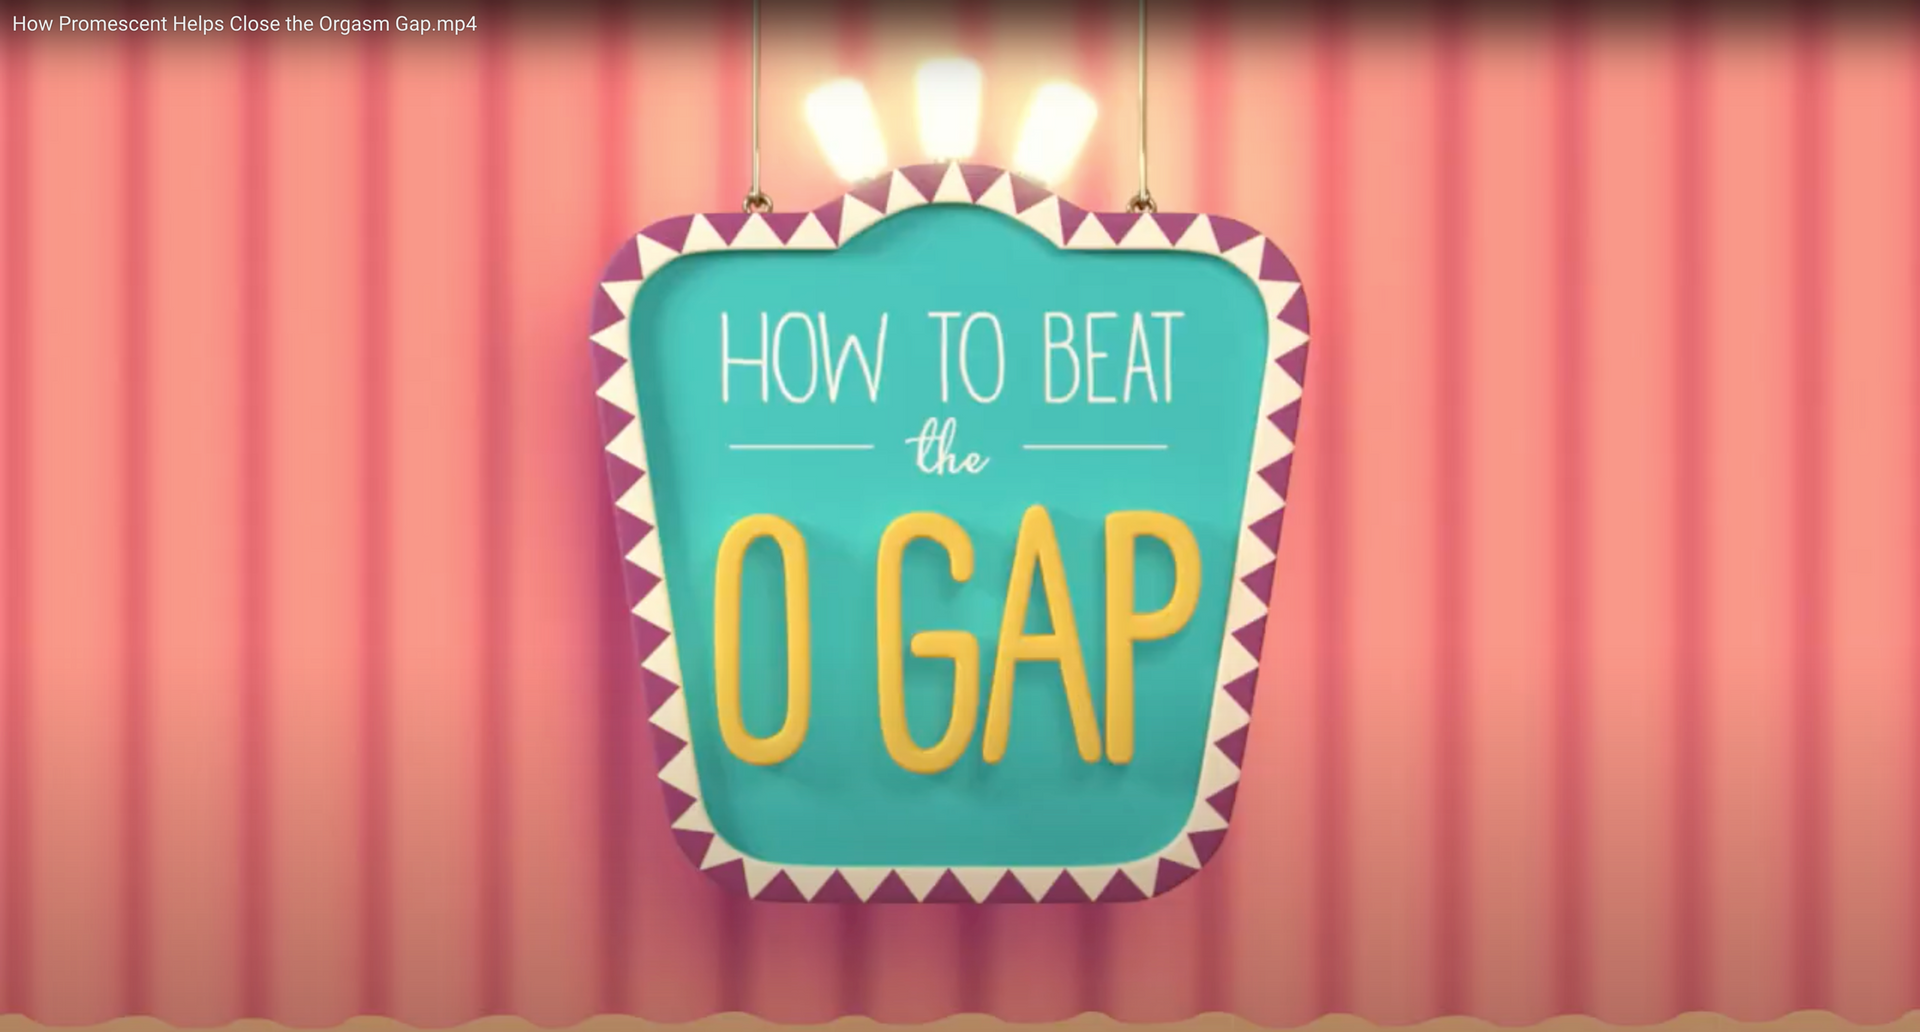 Load video: Promescent believes in helping couples make love longer by closing the orgasm gap.